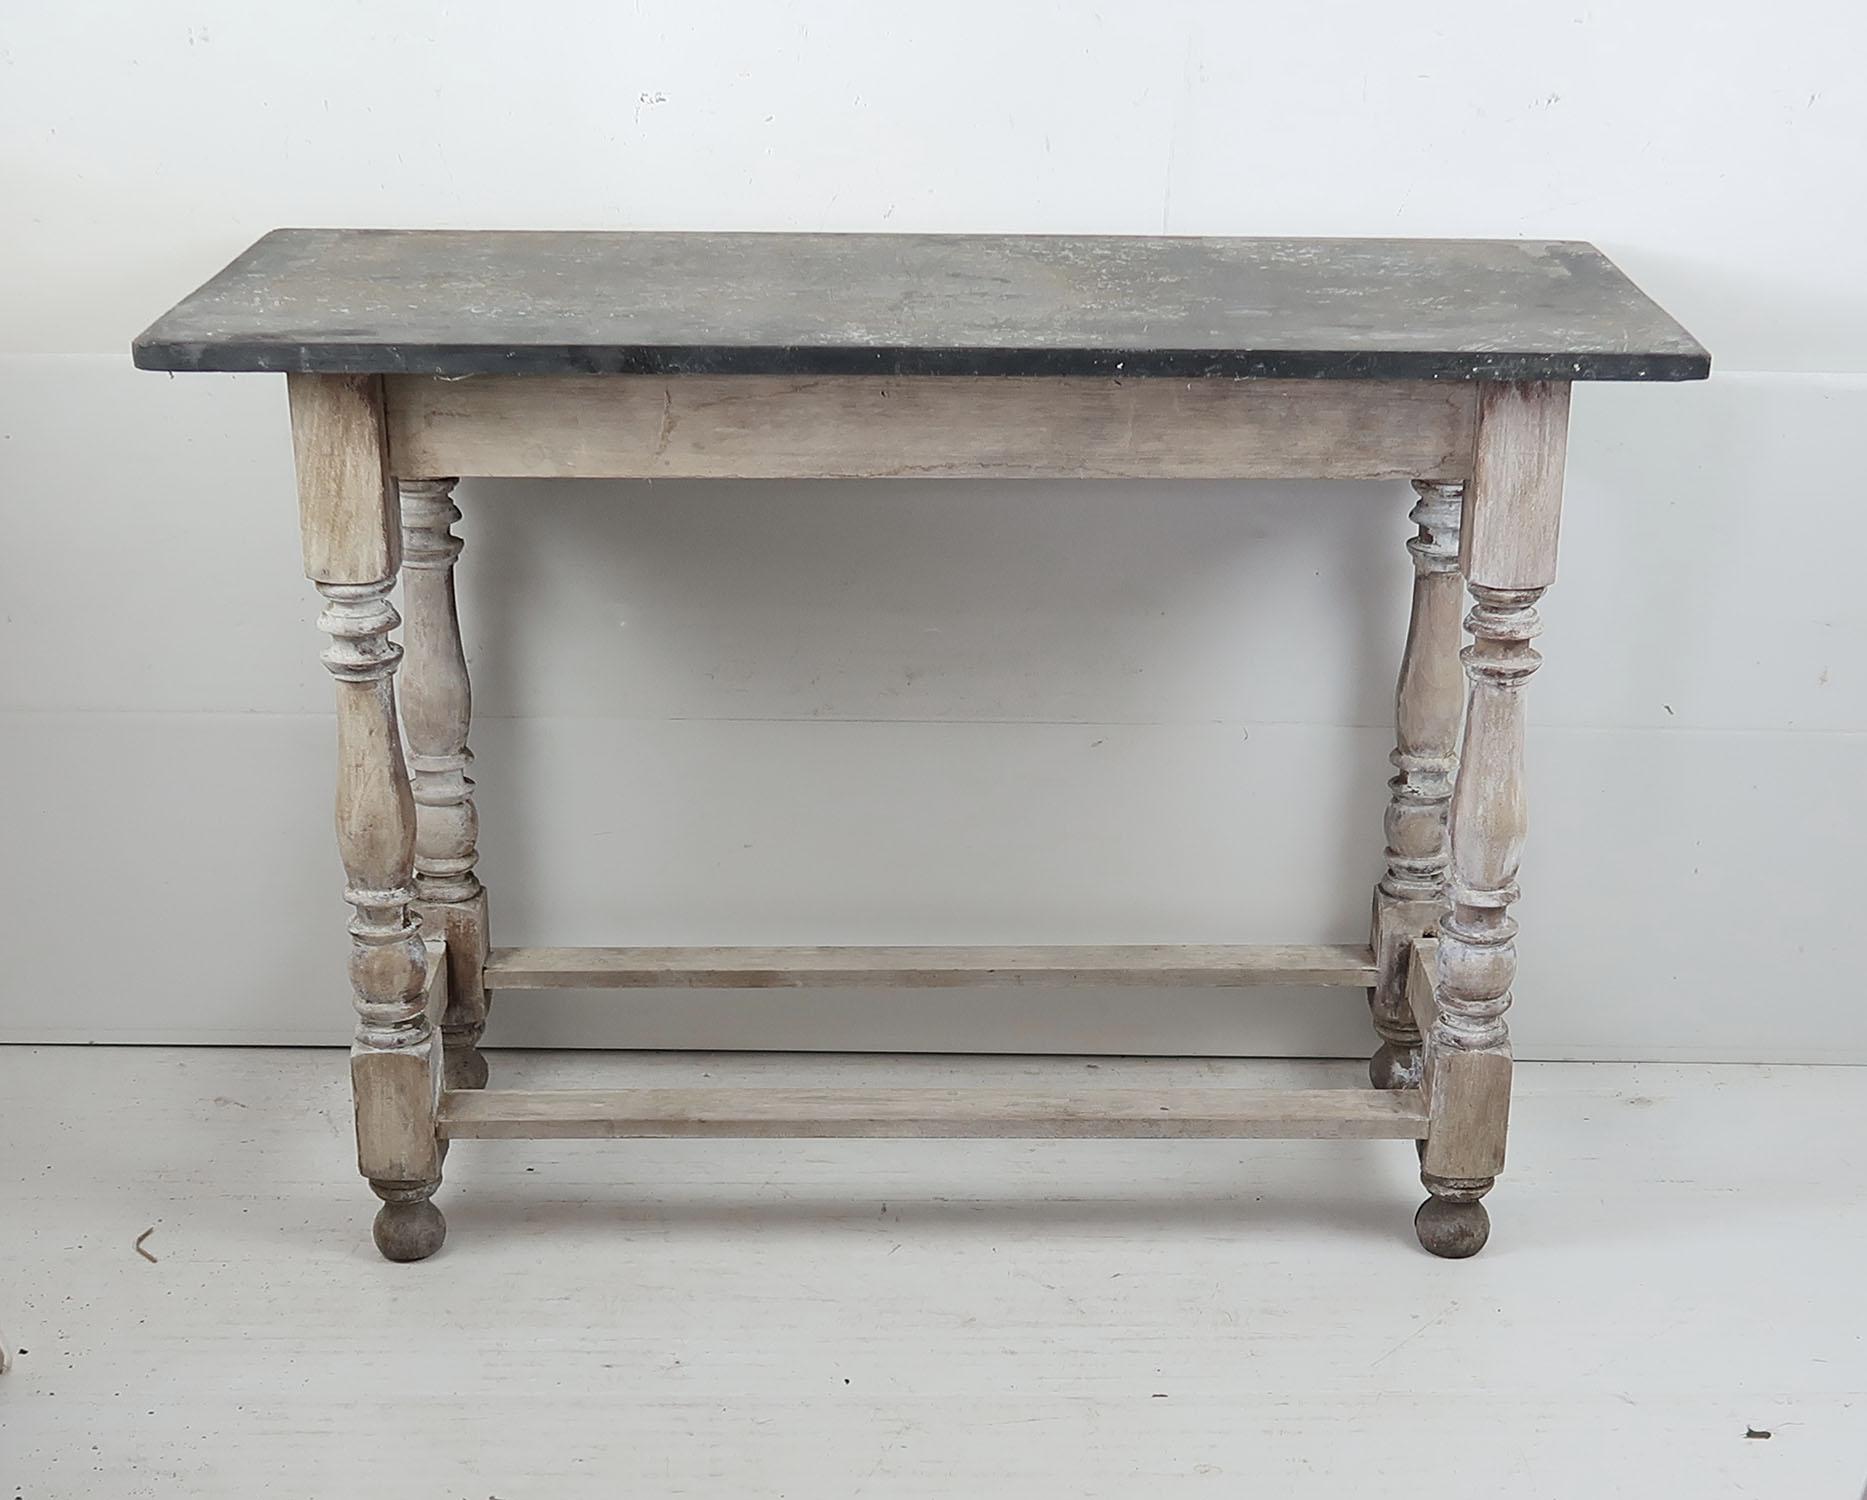 Rustic Small Antique Marble Topped Side Table, English, 19th Century